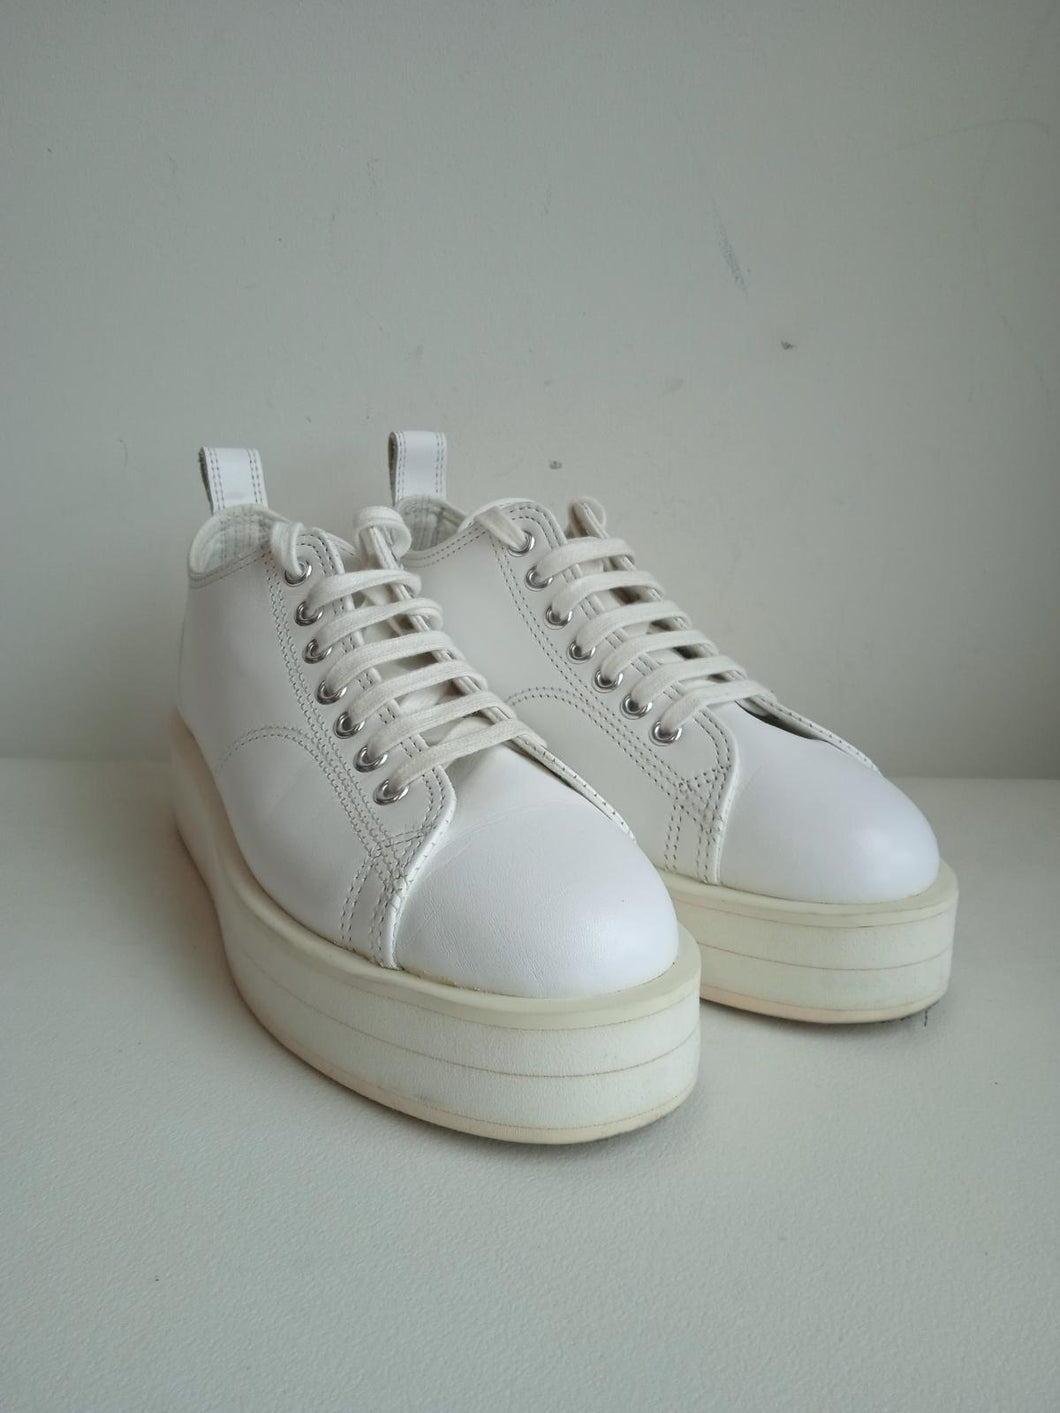 COMME DES GARCONS Ladies White Leather Lace-Up Low Top Trainers Approx. UK4